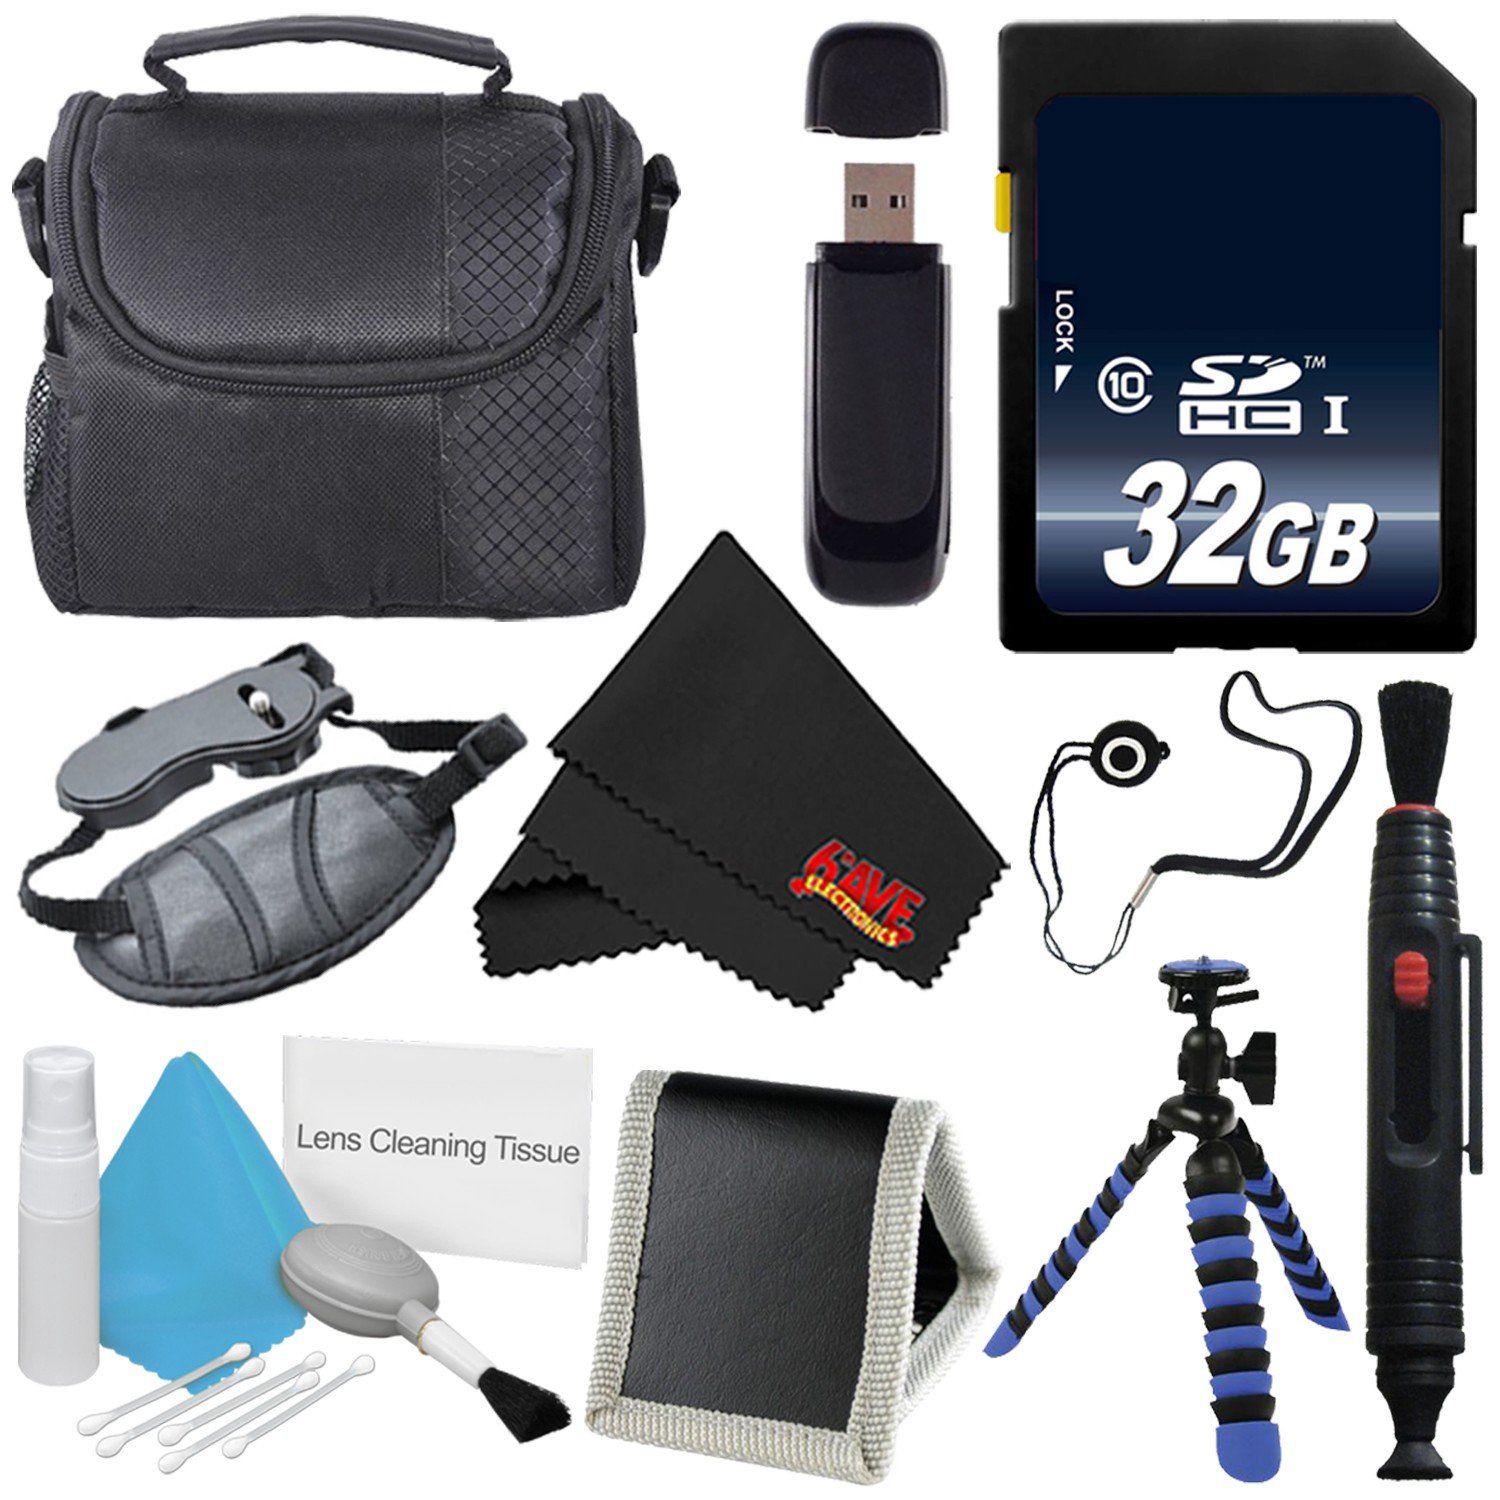 Accessory Kit for Nikon Coolpix B500,B700, P900, 32GB SDHC Class 10 Secure Digital High Speed Memory Card + Camera Case